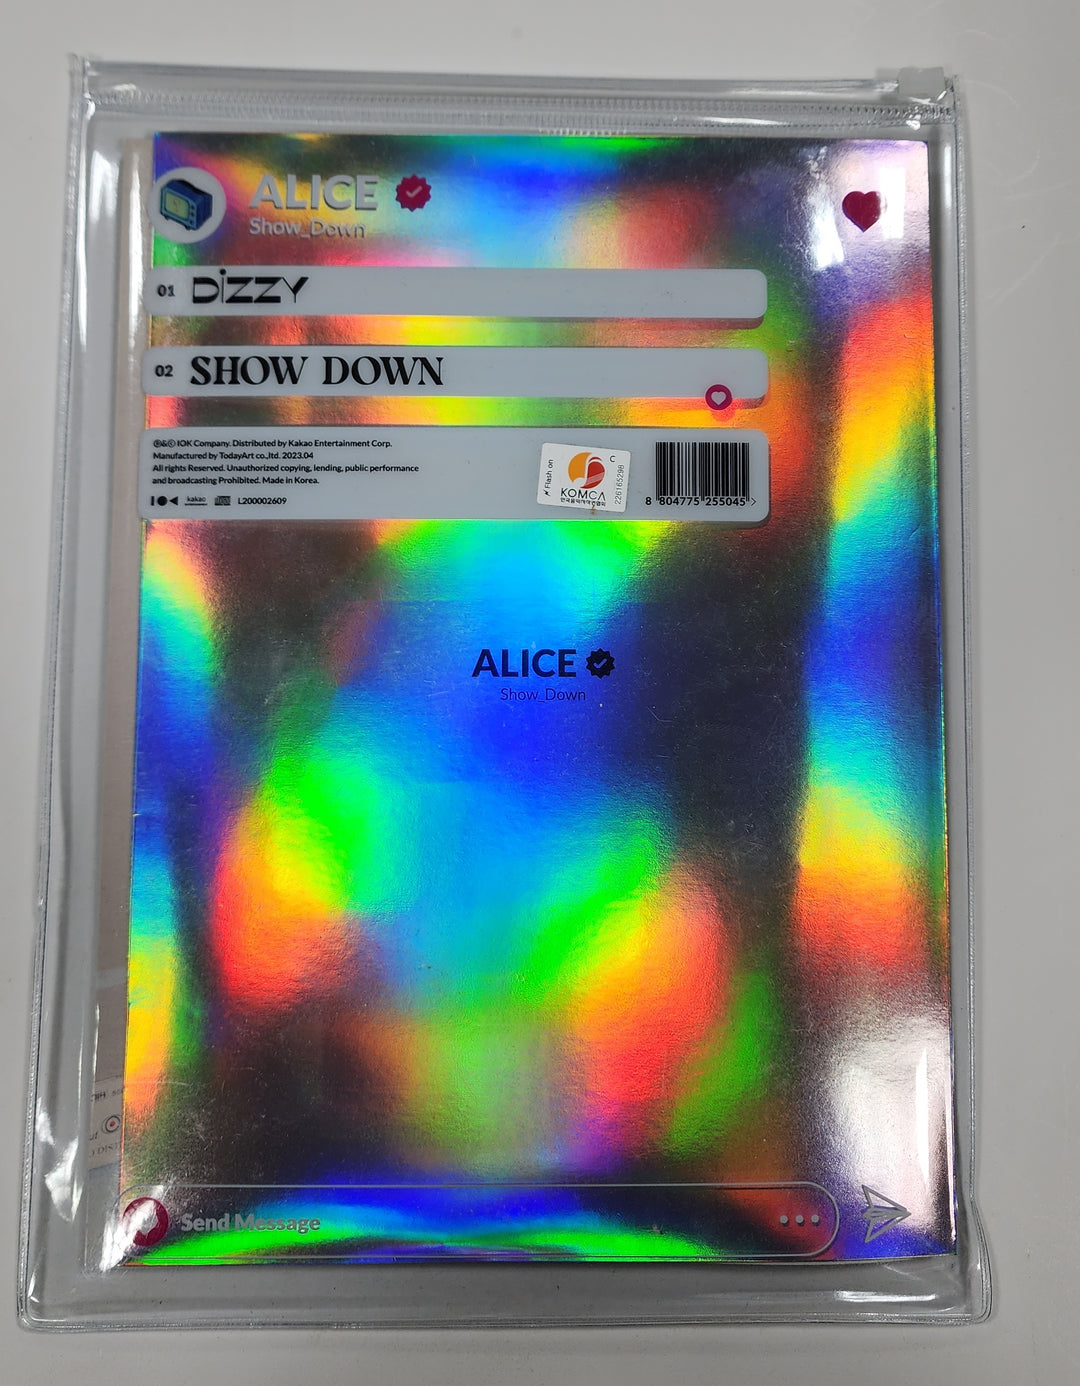 ALICE "SHOW DOWN" - Hand Autographed(Signed) Album